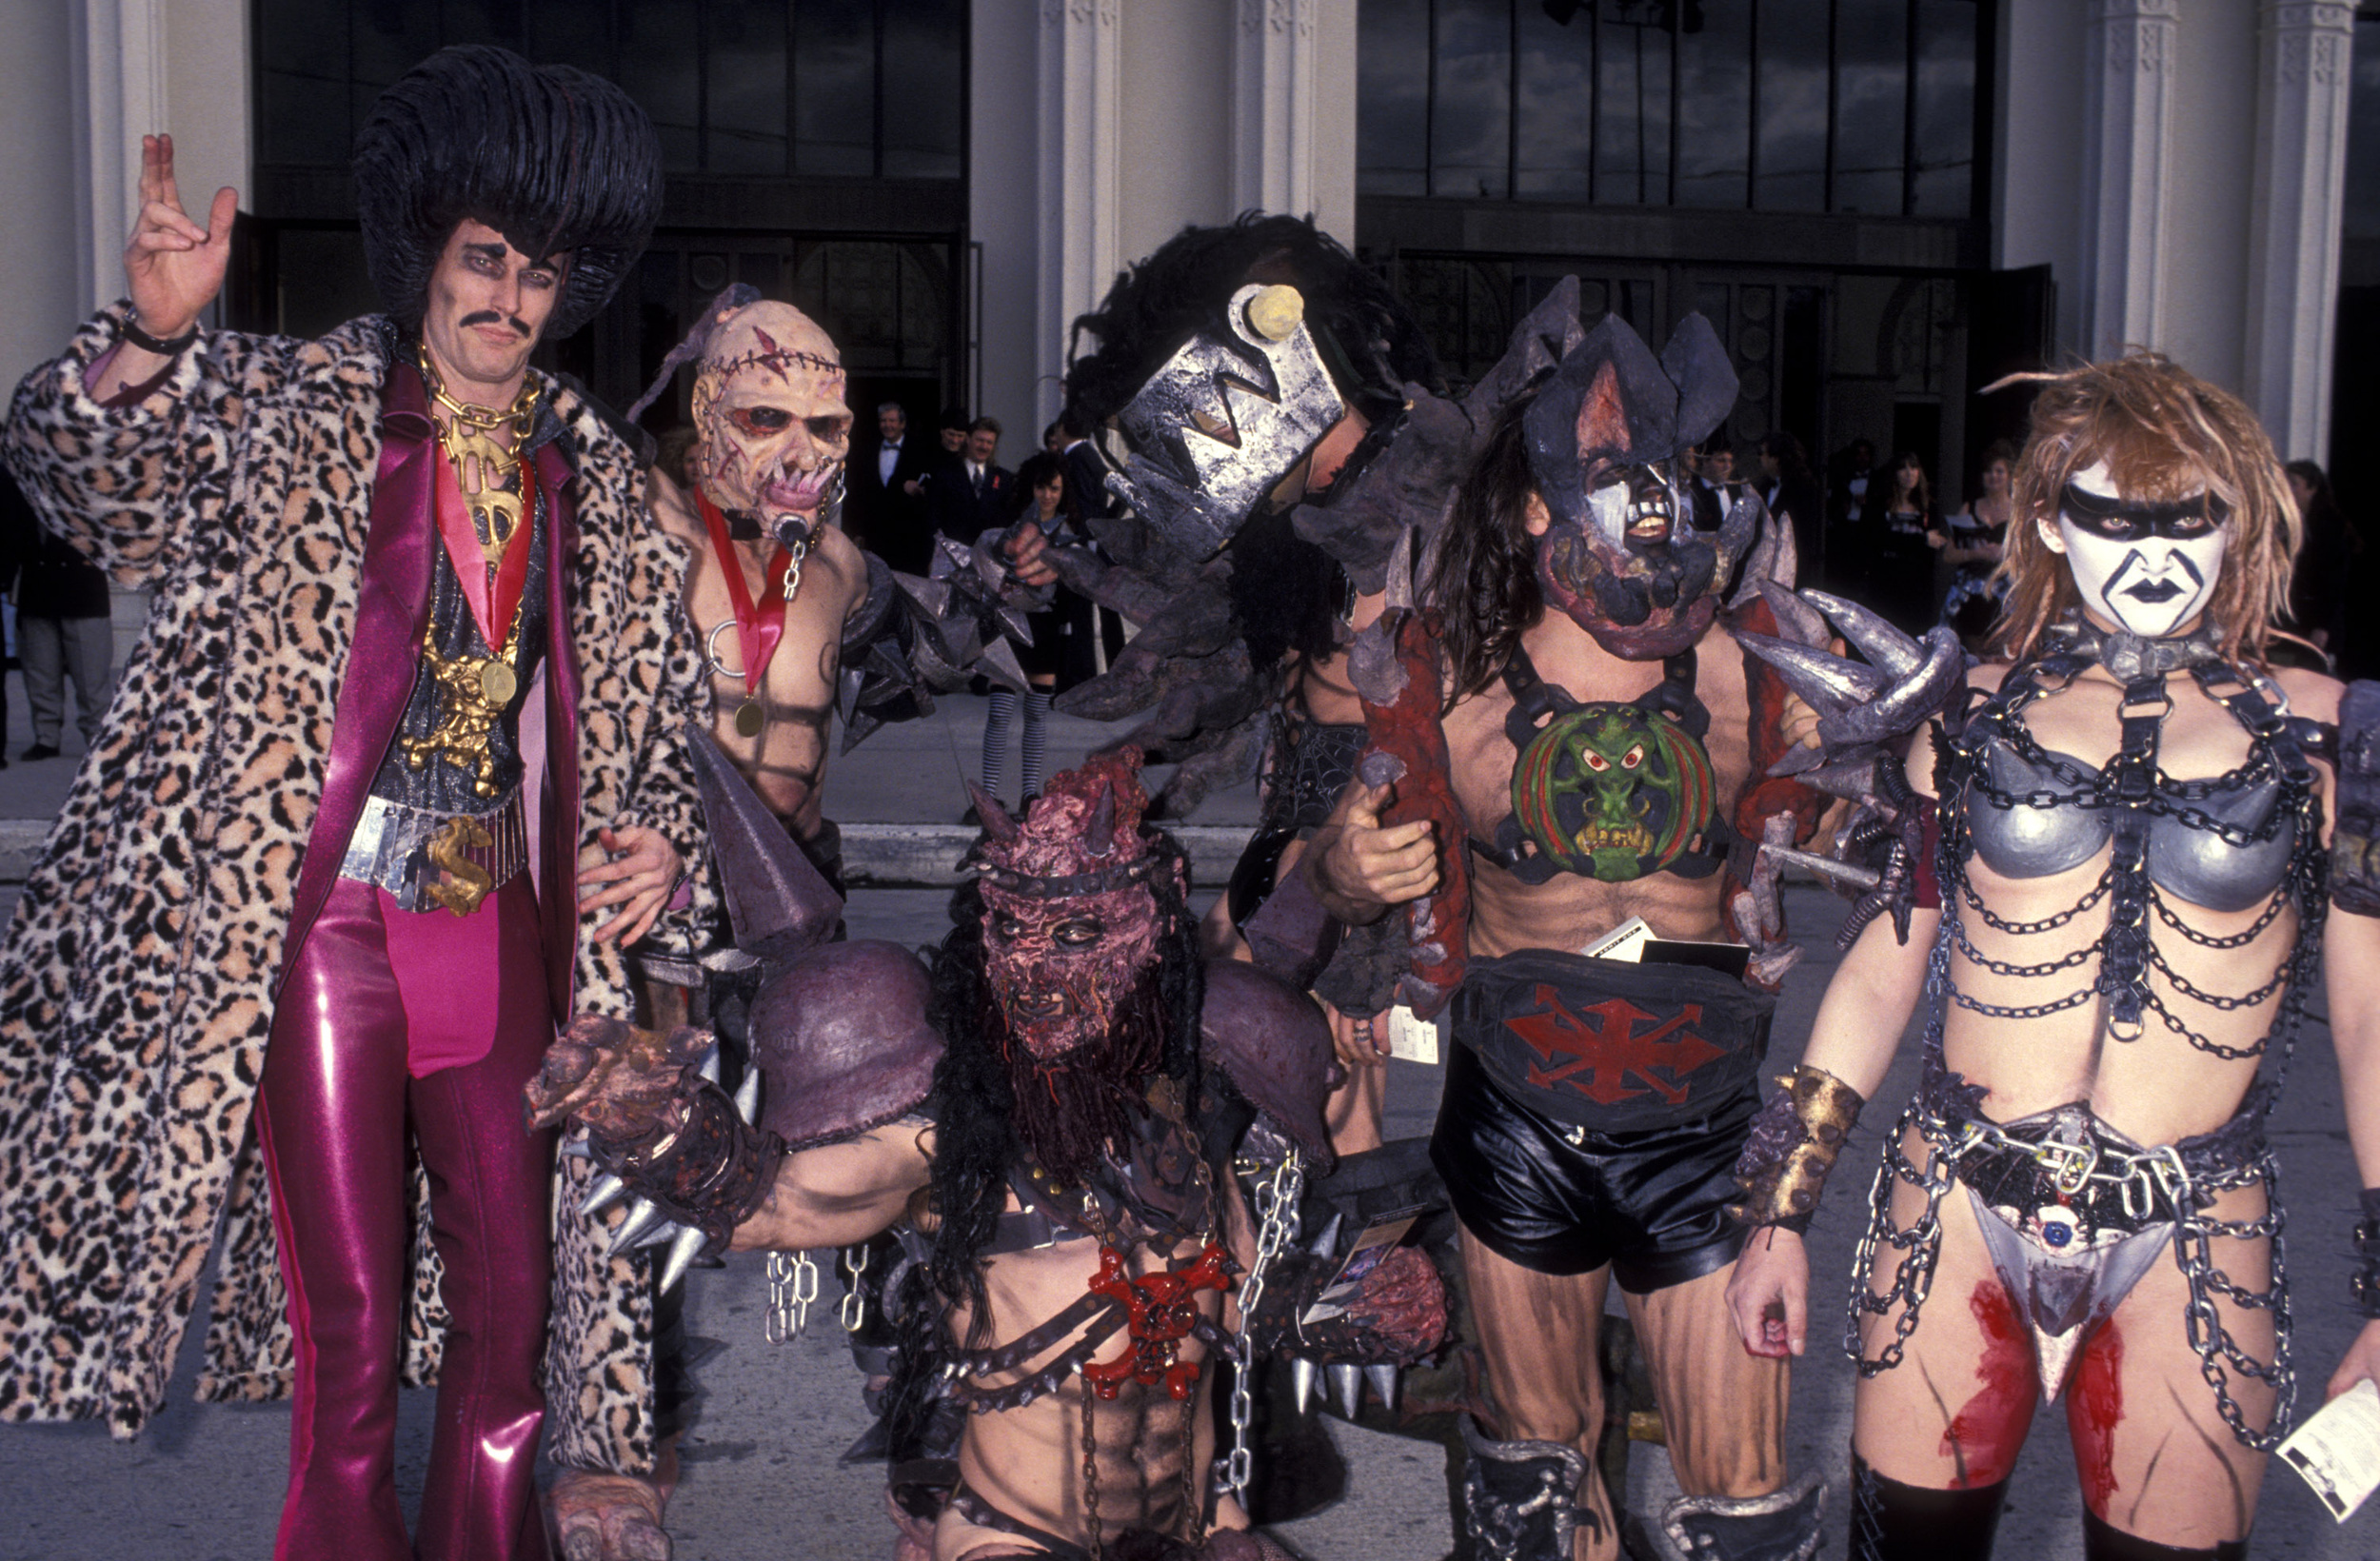 <p>Since 1984, GWAR has built a cult-like following with its unique brand of <a href="https://www.youtube.com/watch?v=91l_J0dh3Zw">thrash metal and hardcore punk</a>. Of course, the band's true appeal is its visual presence. Each member sports a mythical, gory, and grotesque costume from another realm with a science-fiction base. Notably, co-founder and lead singer Oderus Urungus, originally portrayed by late lead singer David Brockie. Its songs and mildly inappropriate stage performances have a certain sense of camp, complete with sexual musings and satire on topics such as politics and pop culture. Of course, the band has <a href="https://musicfeeds.com.au/news/gwar-respond-to-conservative-groups-appalled-by-abbott-decapitation/#/slide/1">generated plenty of controversy</a> over the years.</p><p>You may also like: <a href='https://www.yardbarker.com/entertainment/articles/the_best_and_worst_action_movies_based_on_tv_shows_012324/s1__39189675'>The best and worst action movies based on TV shows</a></p>